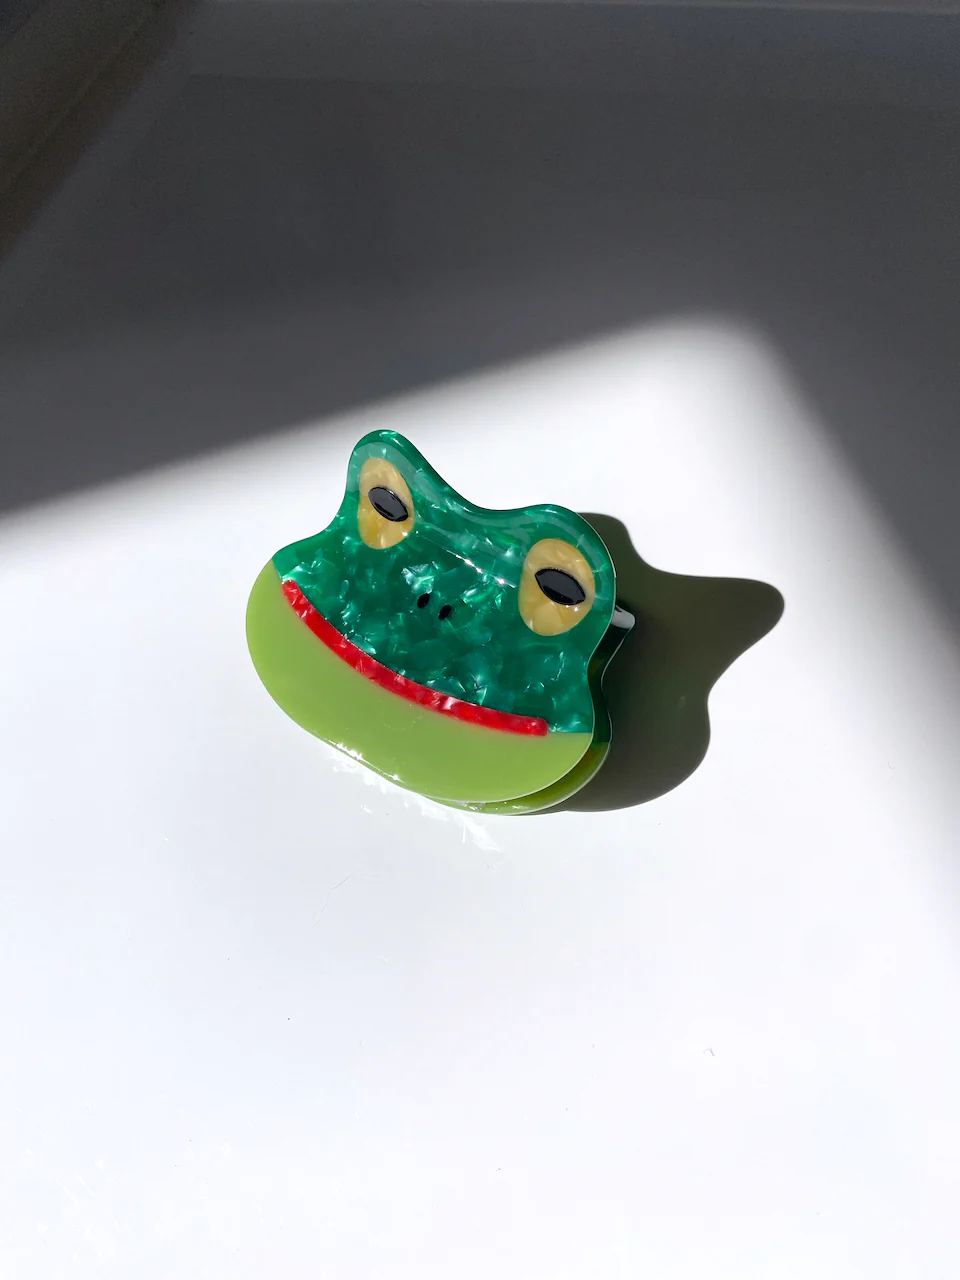 GREEN HAIR CLIP WITH DIFFERENT COLORED PARTS MADE TO RESEMBLE A SMILING FROG. IT HAS BROWN EYES AND A SMILING RED MOUTH. 